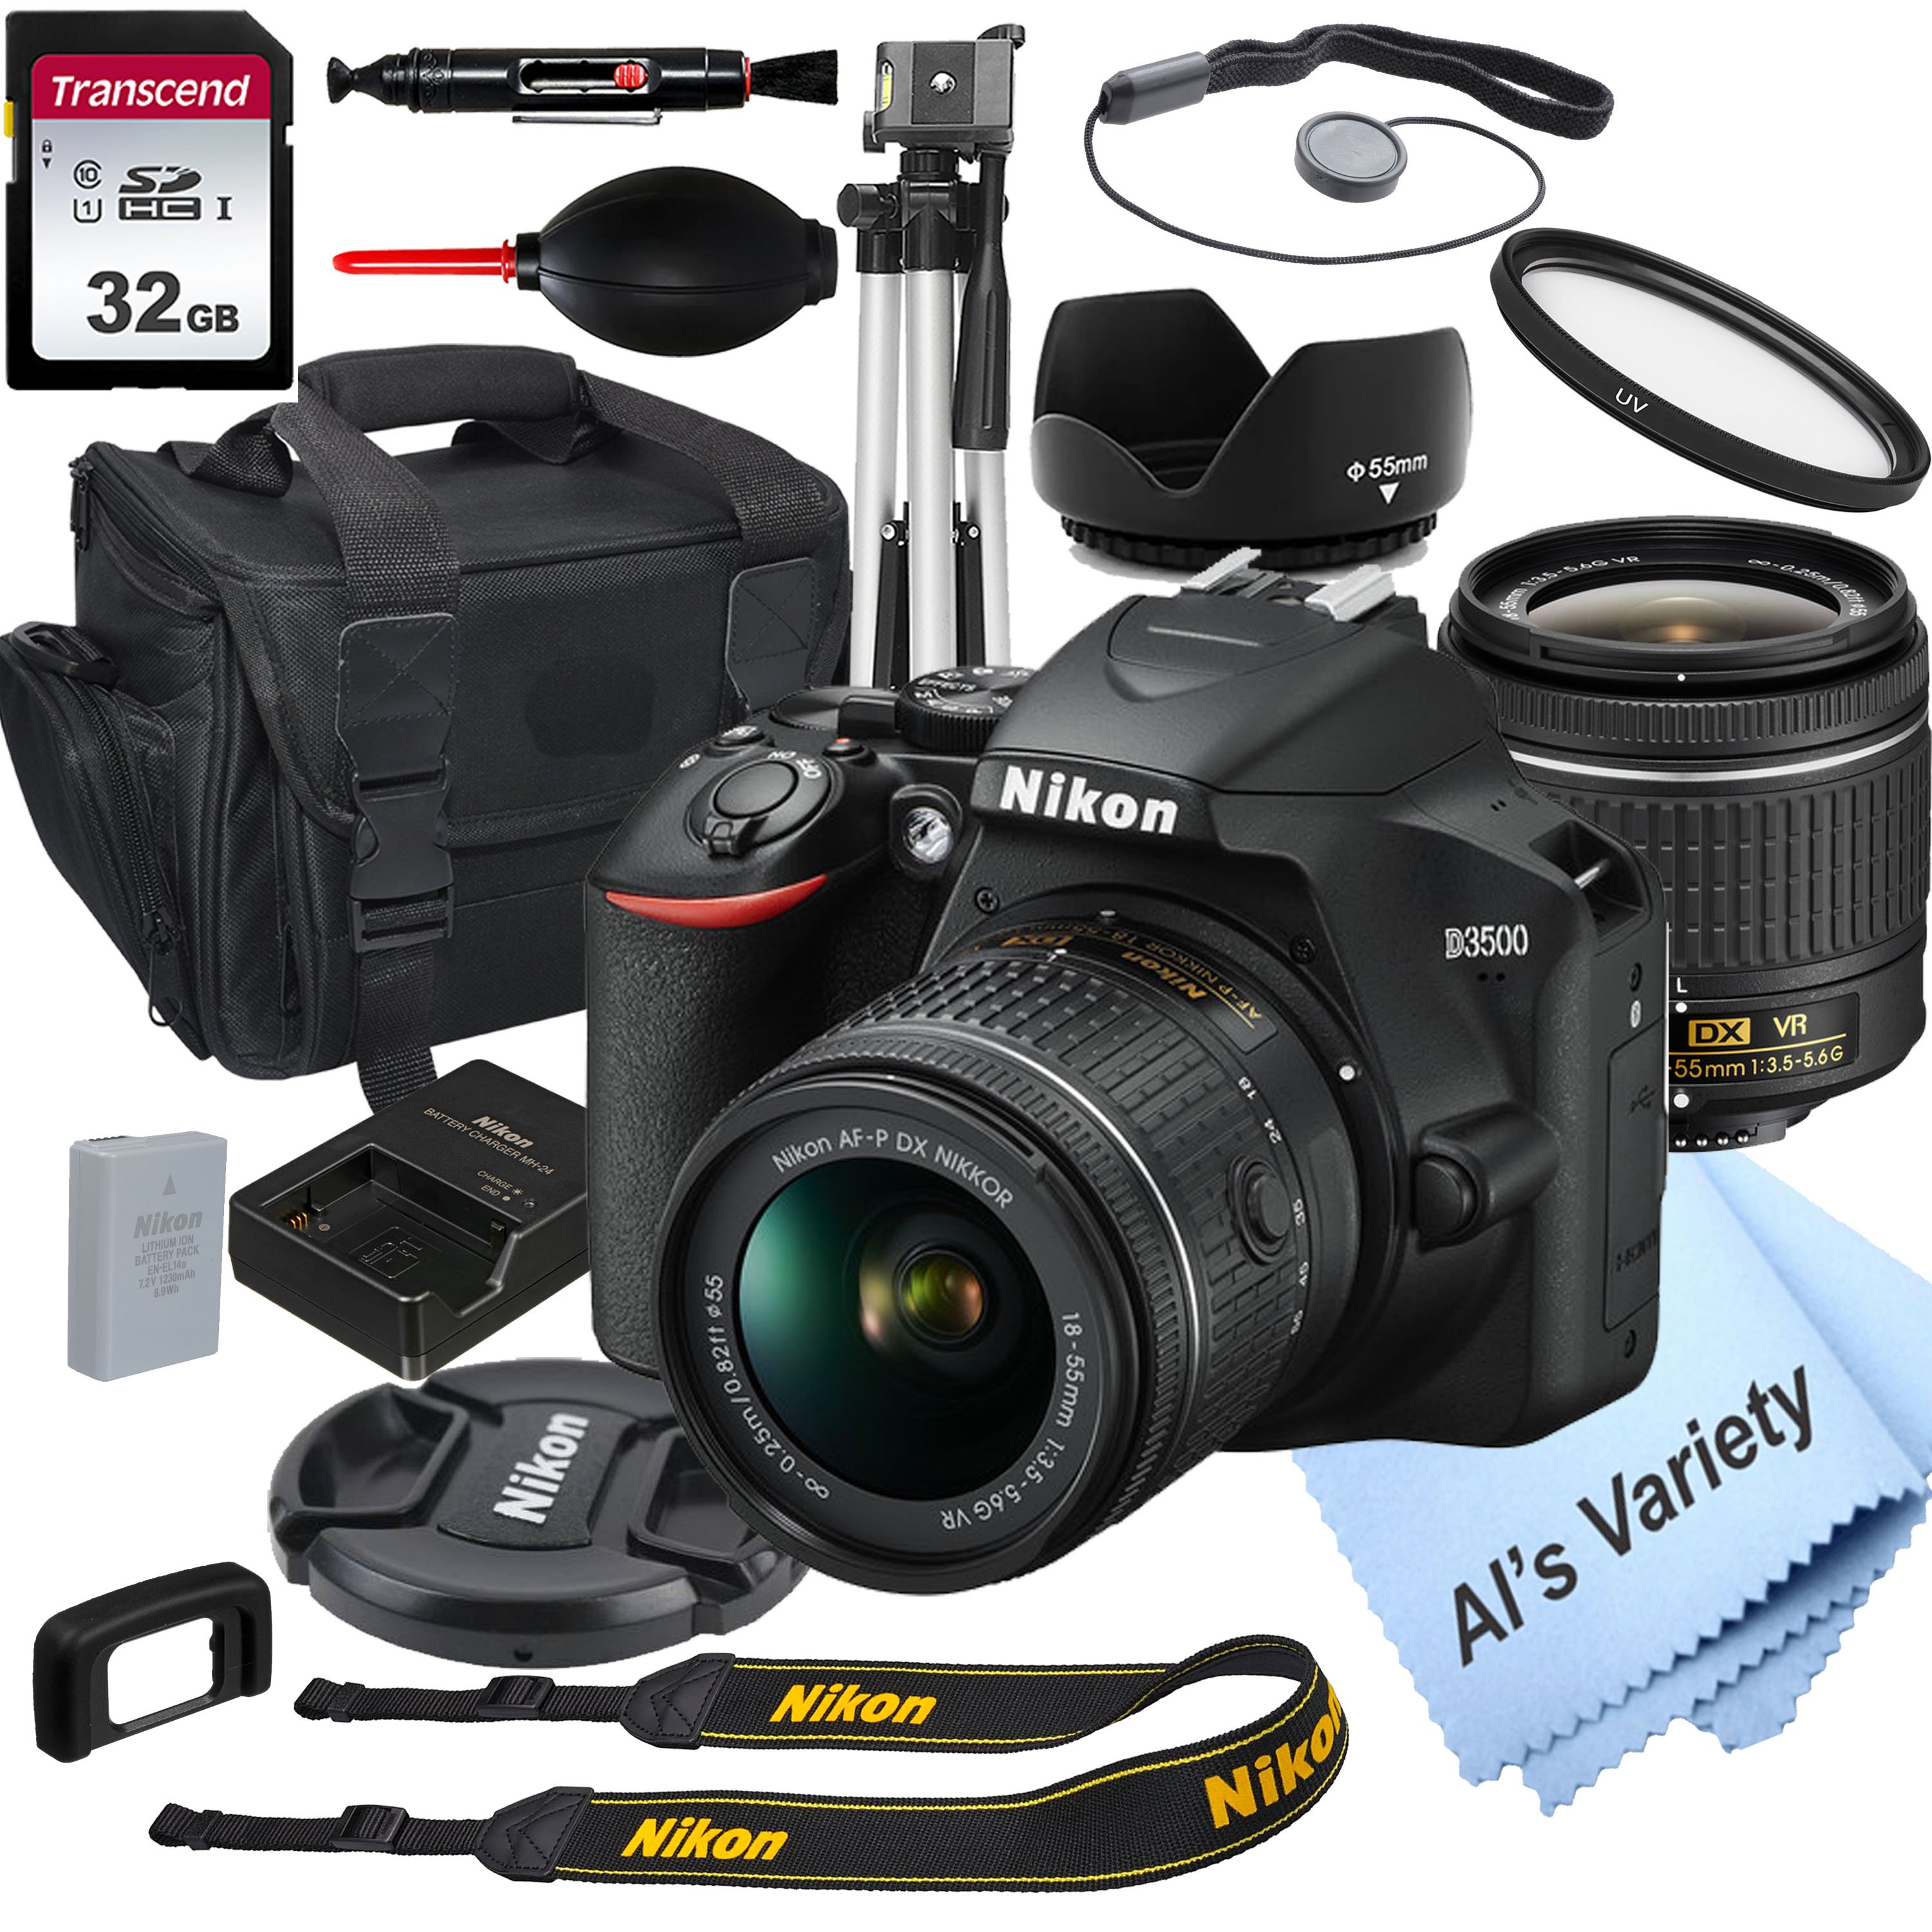 Nikon D3500 DSLR Camera with 18-55mm VR Lens + 32GB Card, Tripod, Case, and More 18pc Bundle - image 1 of 7